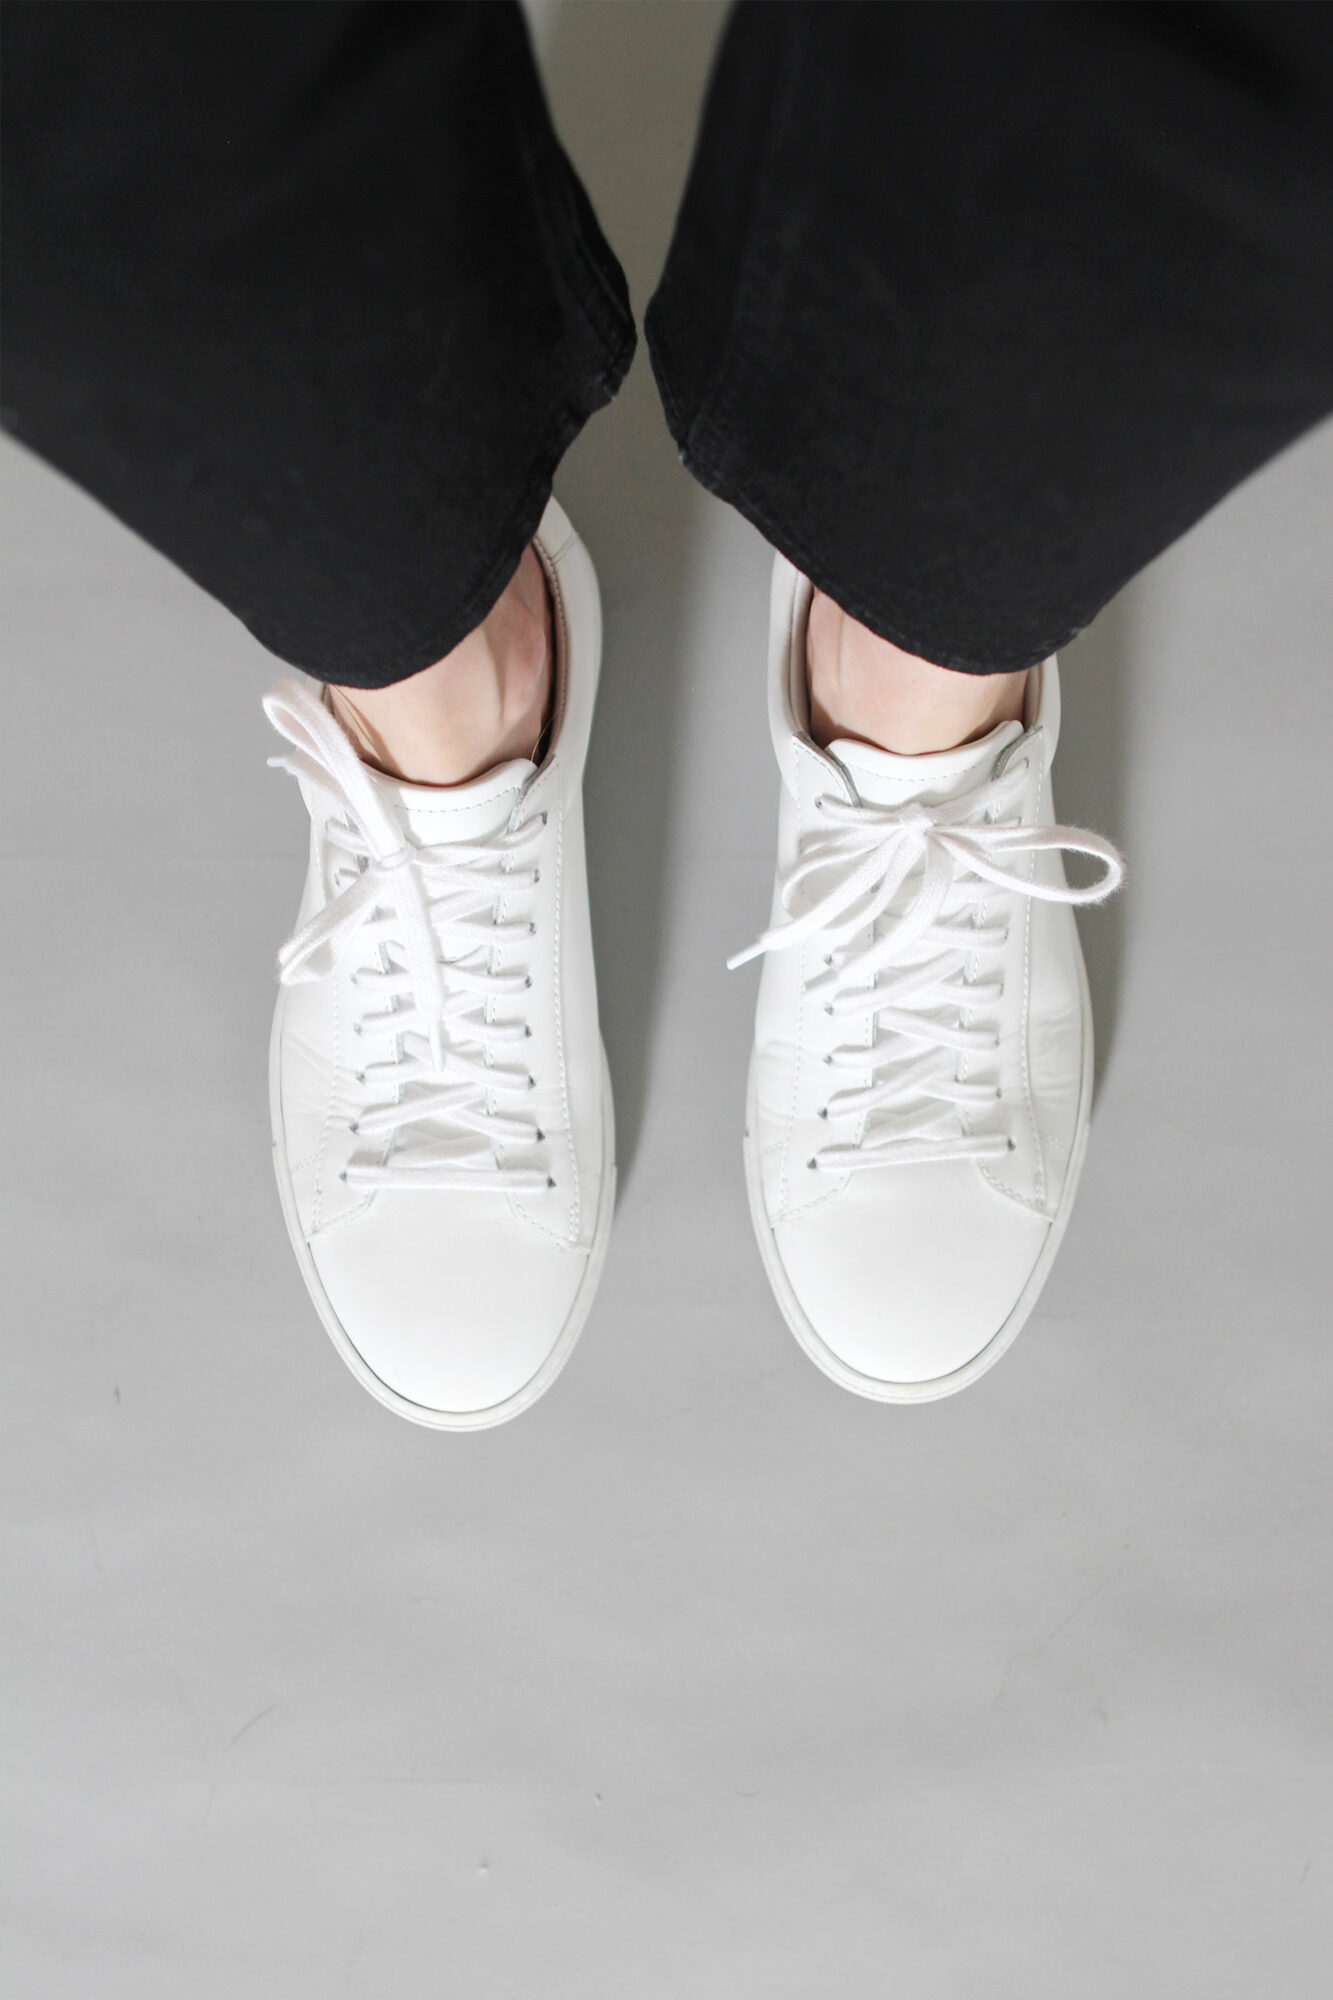 Style Bee - Oliver Cabell - Low 1 White Sneaker Review